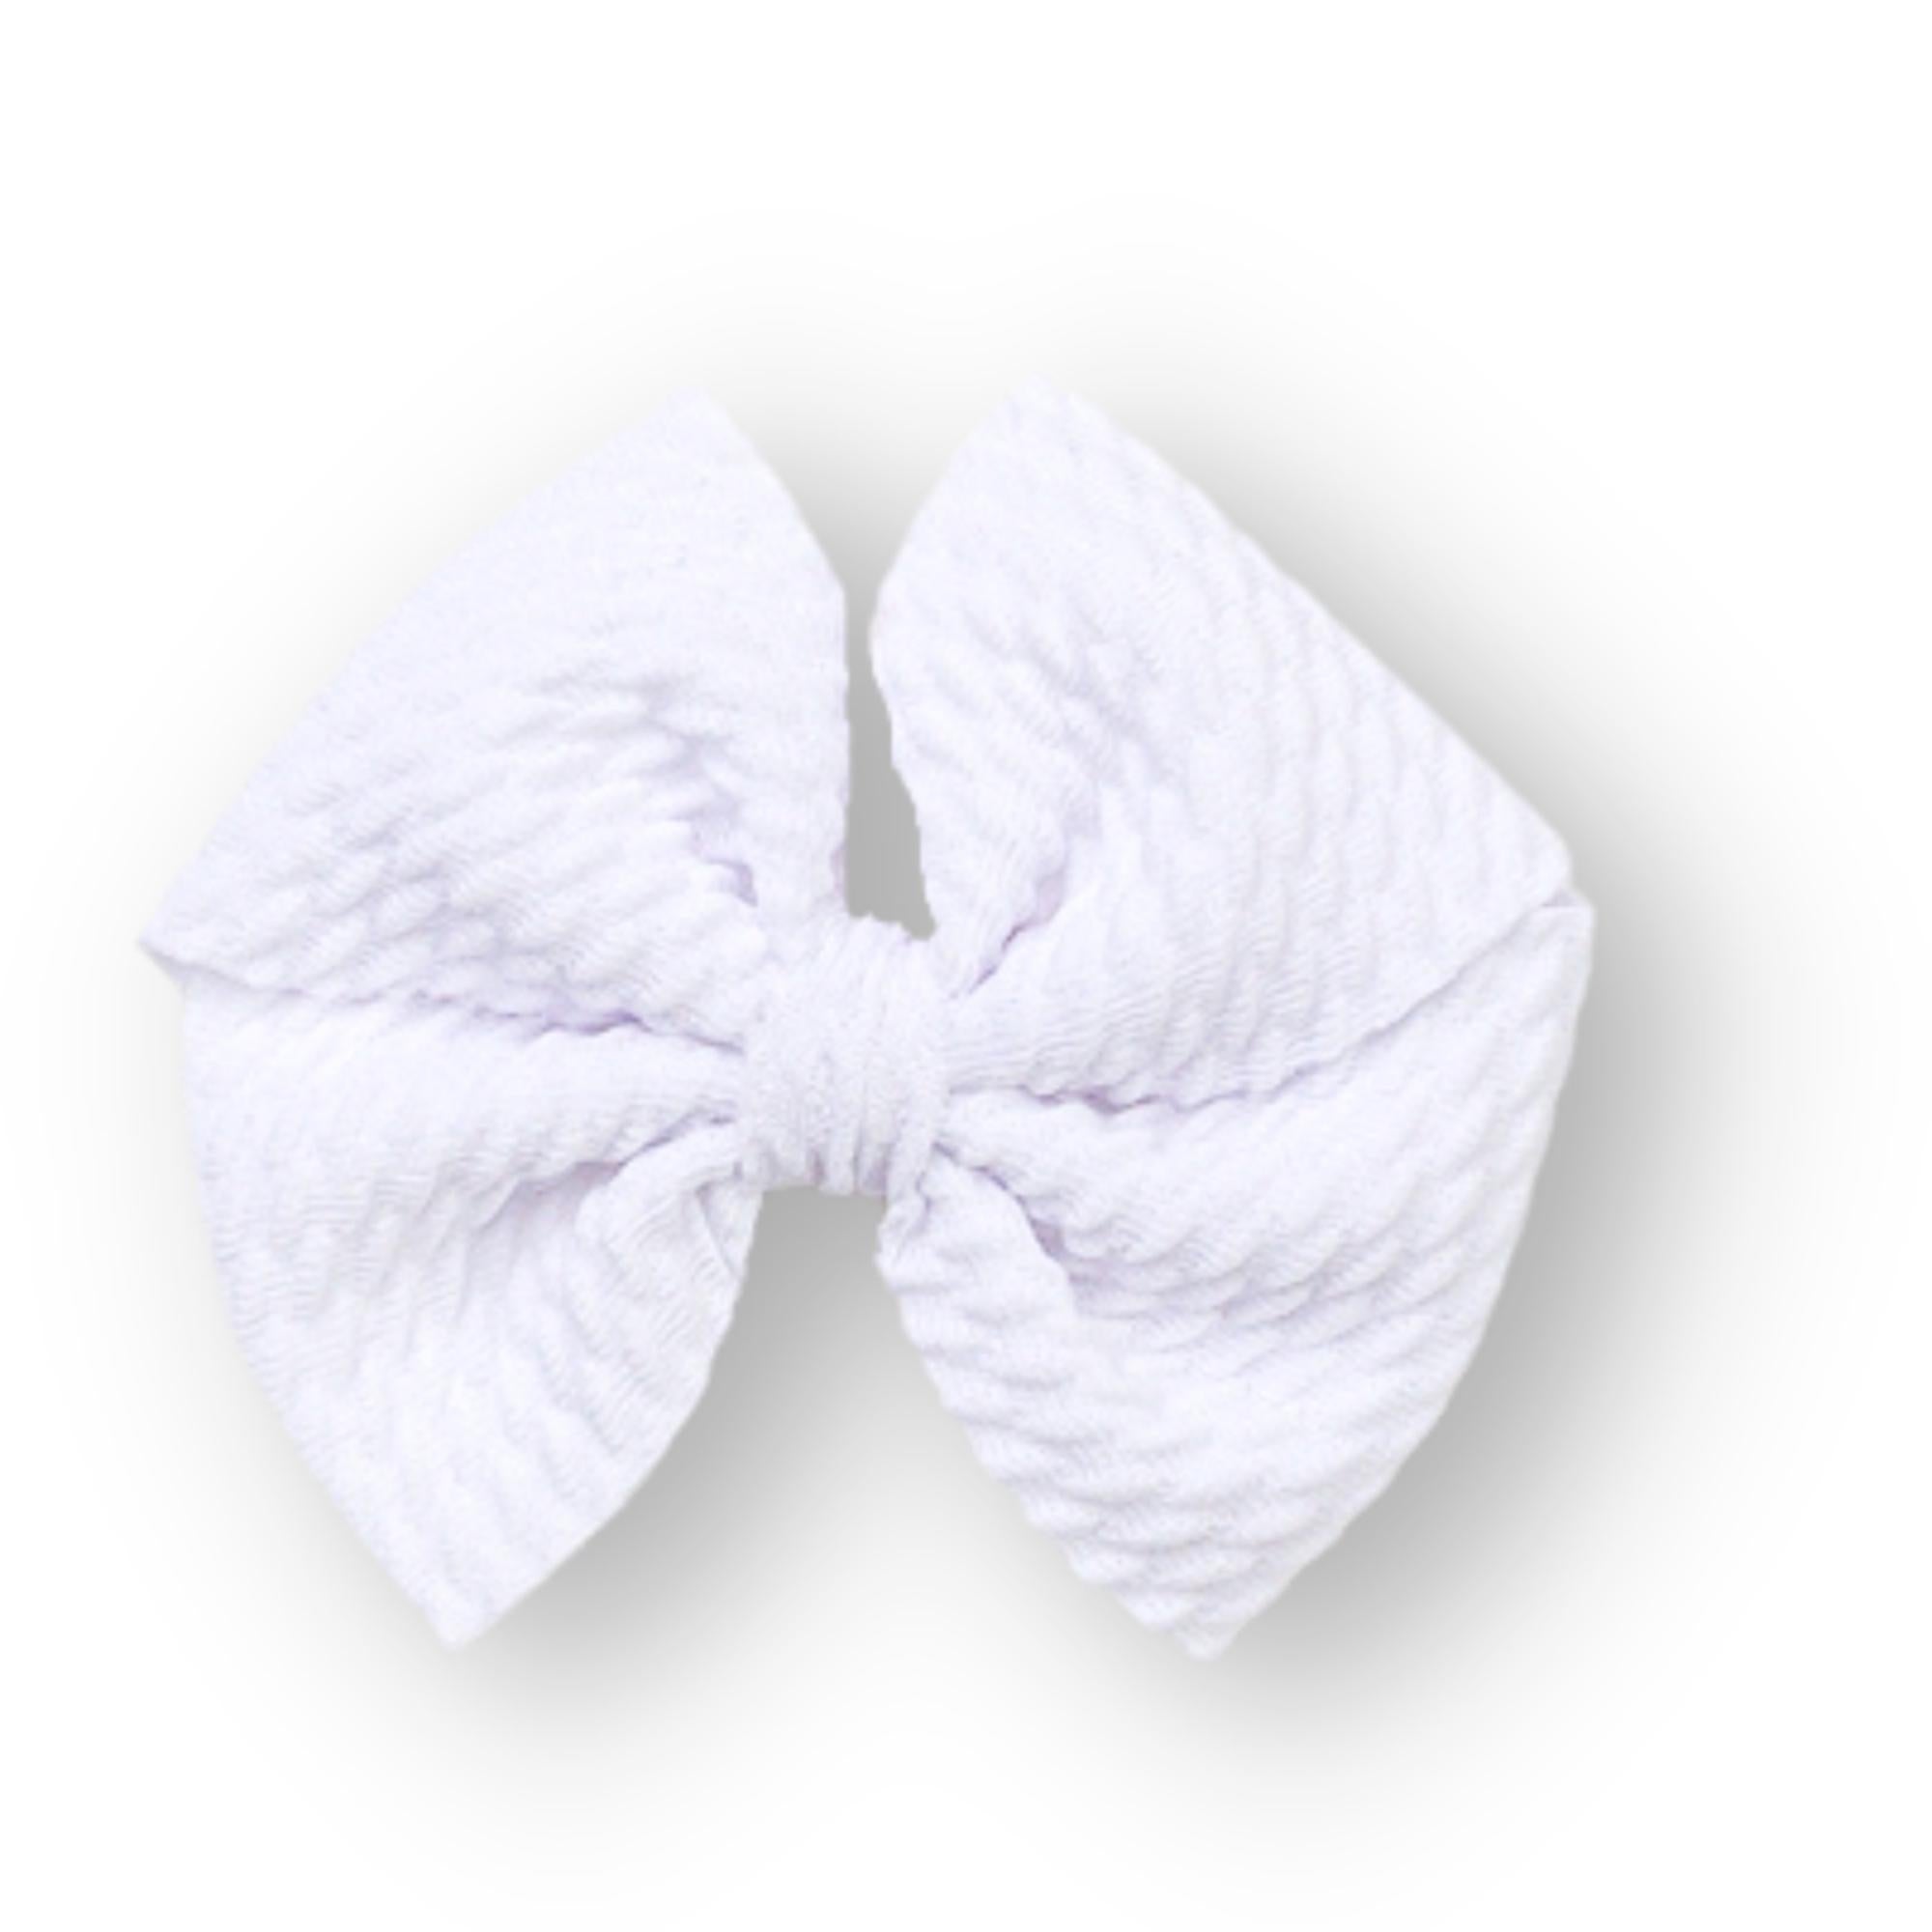 Little Lopers White Butterfly and Dainty Dainty / Flat Clip